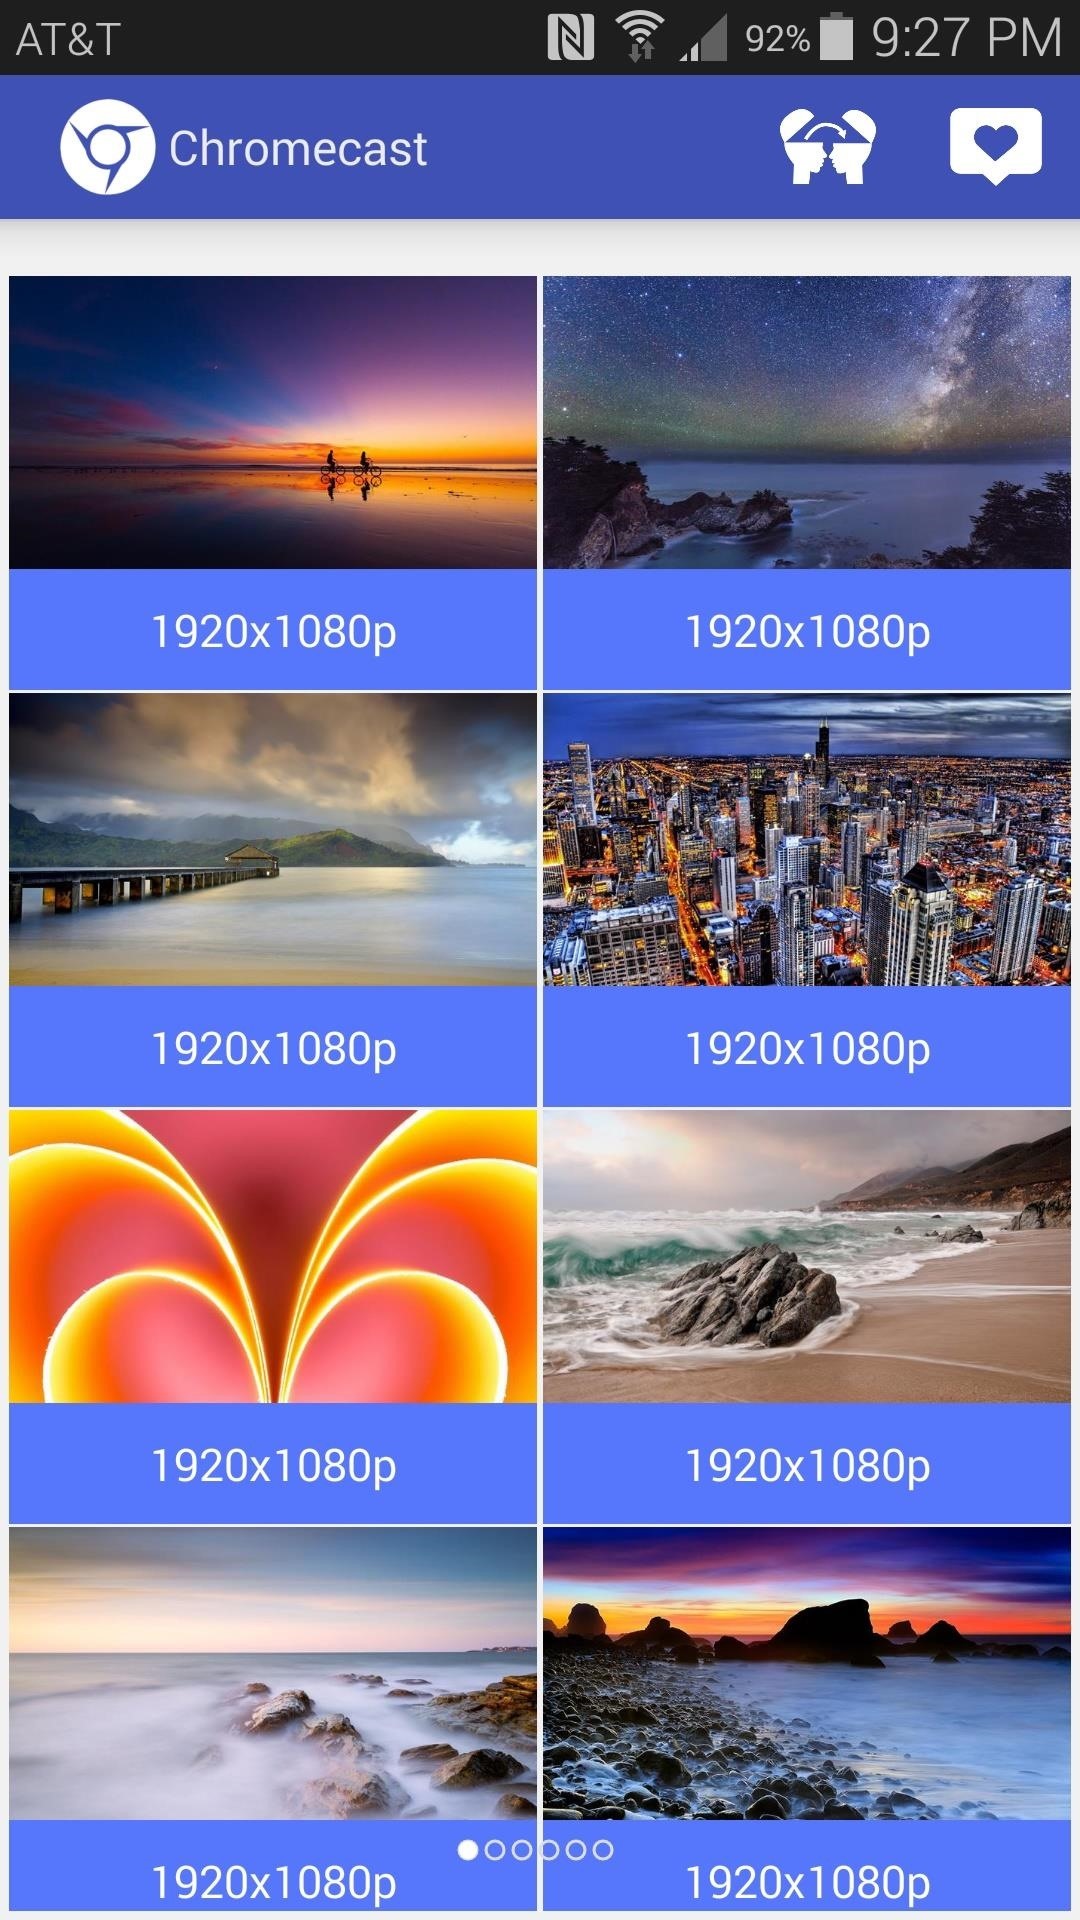 Set Chromecast Background Images as Your Android's Wallpaper